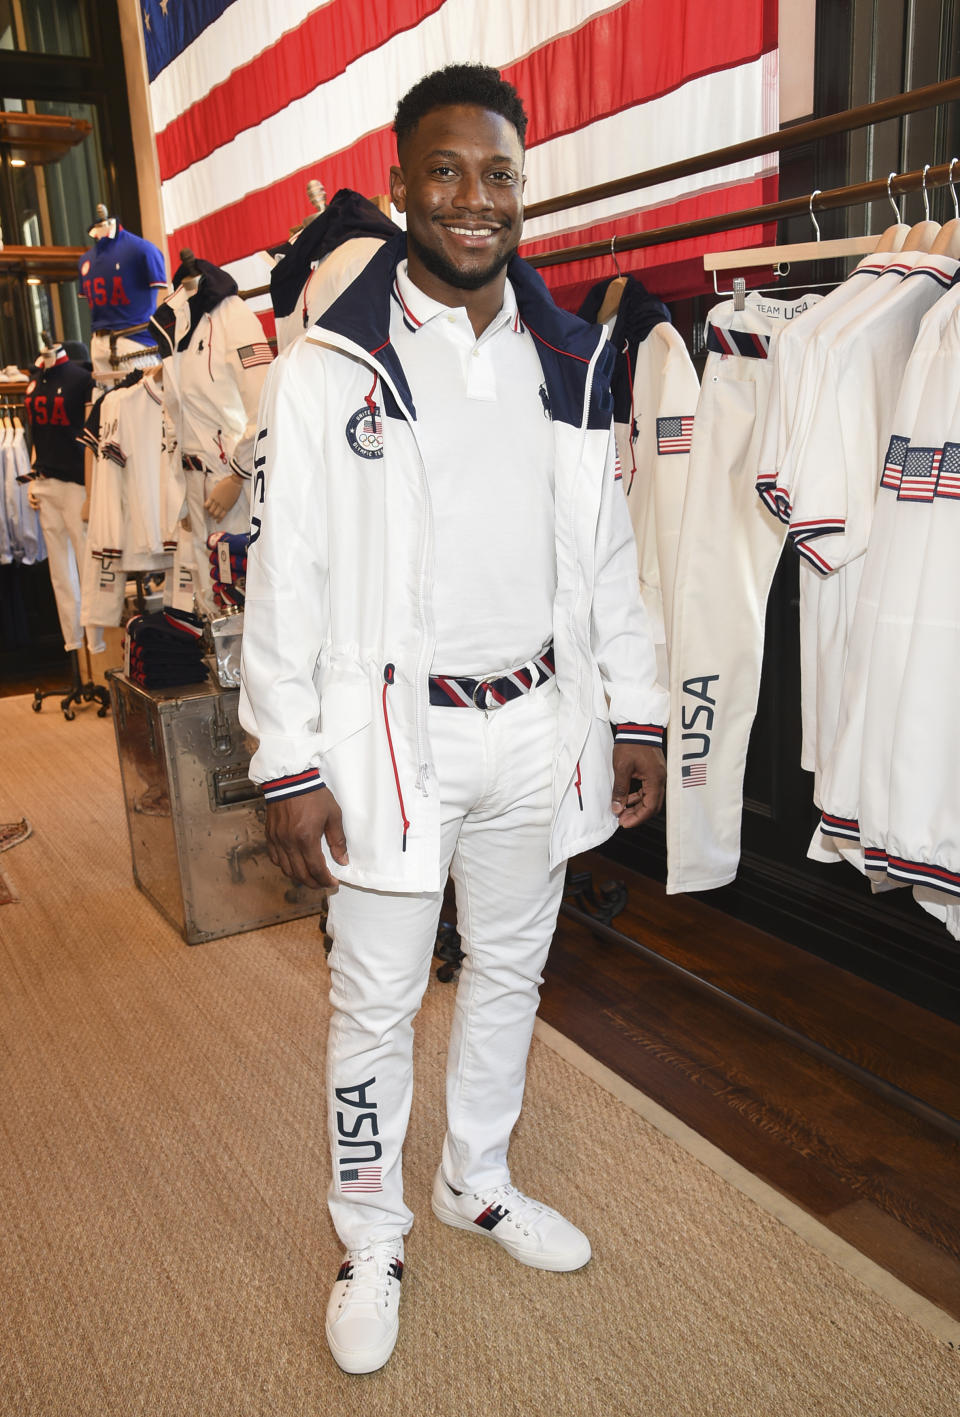 Fencer Daryl Homer participates in the Team USA Tokyo Olympic closing ceremony uniform unveiling at the Ralph Lauren SoHo Store on April 13, 2021, in New York. Ralph Lauren is an official outfitter of the 2021 U.S. Olympic Team. (Photo by Evan Agostini/Invision/AP)